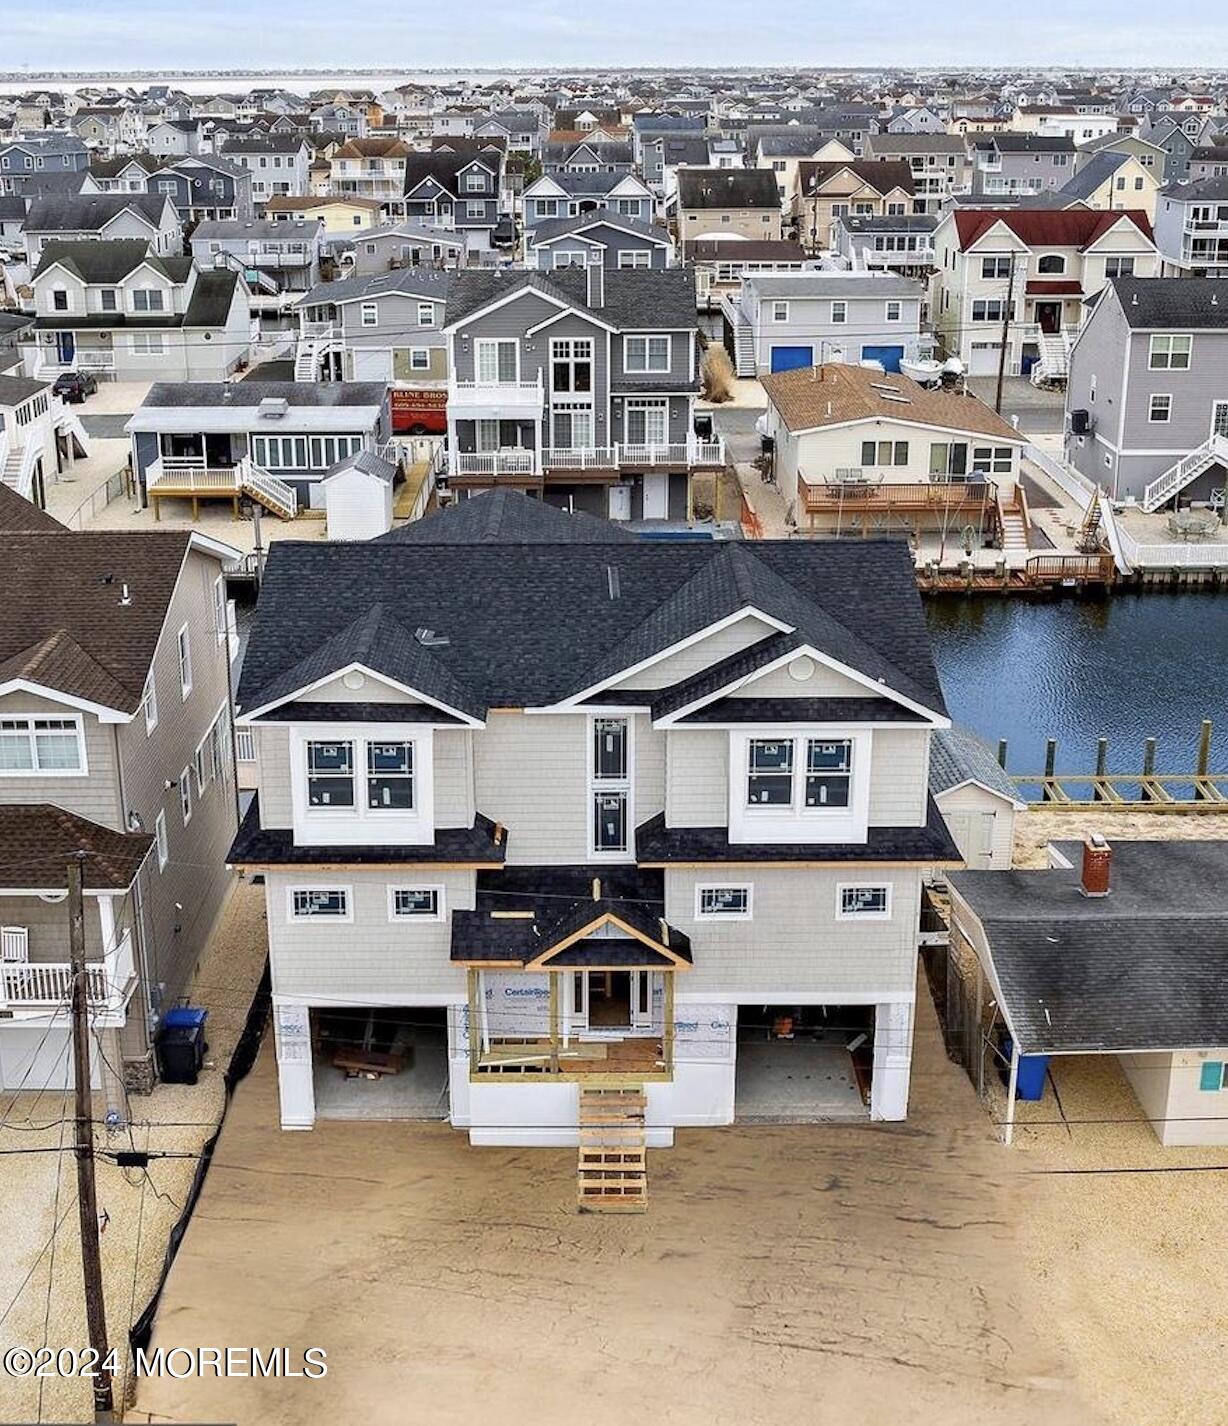 an aerial view of a house with parking spaces